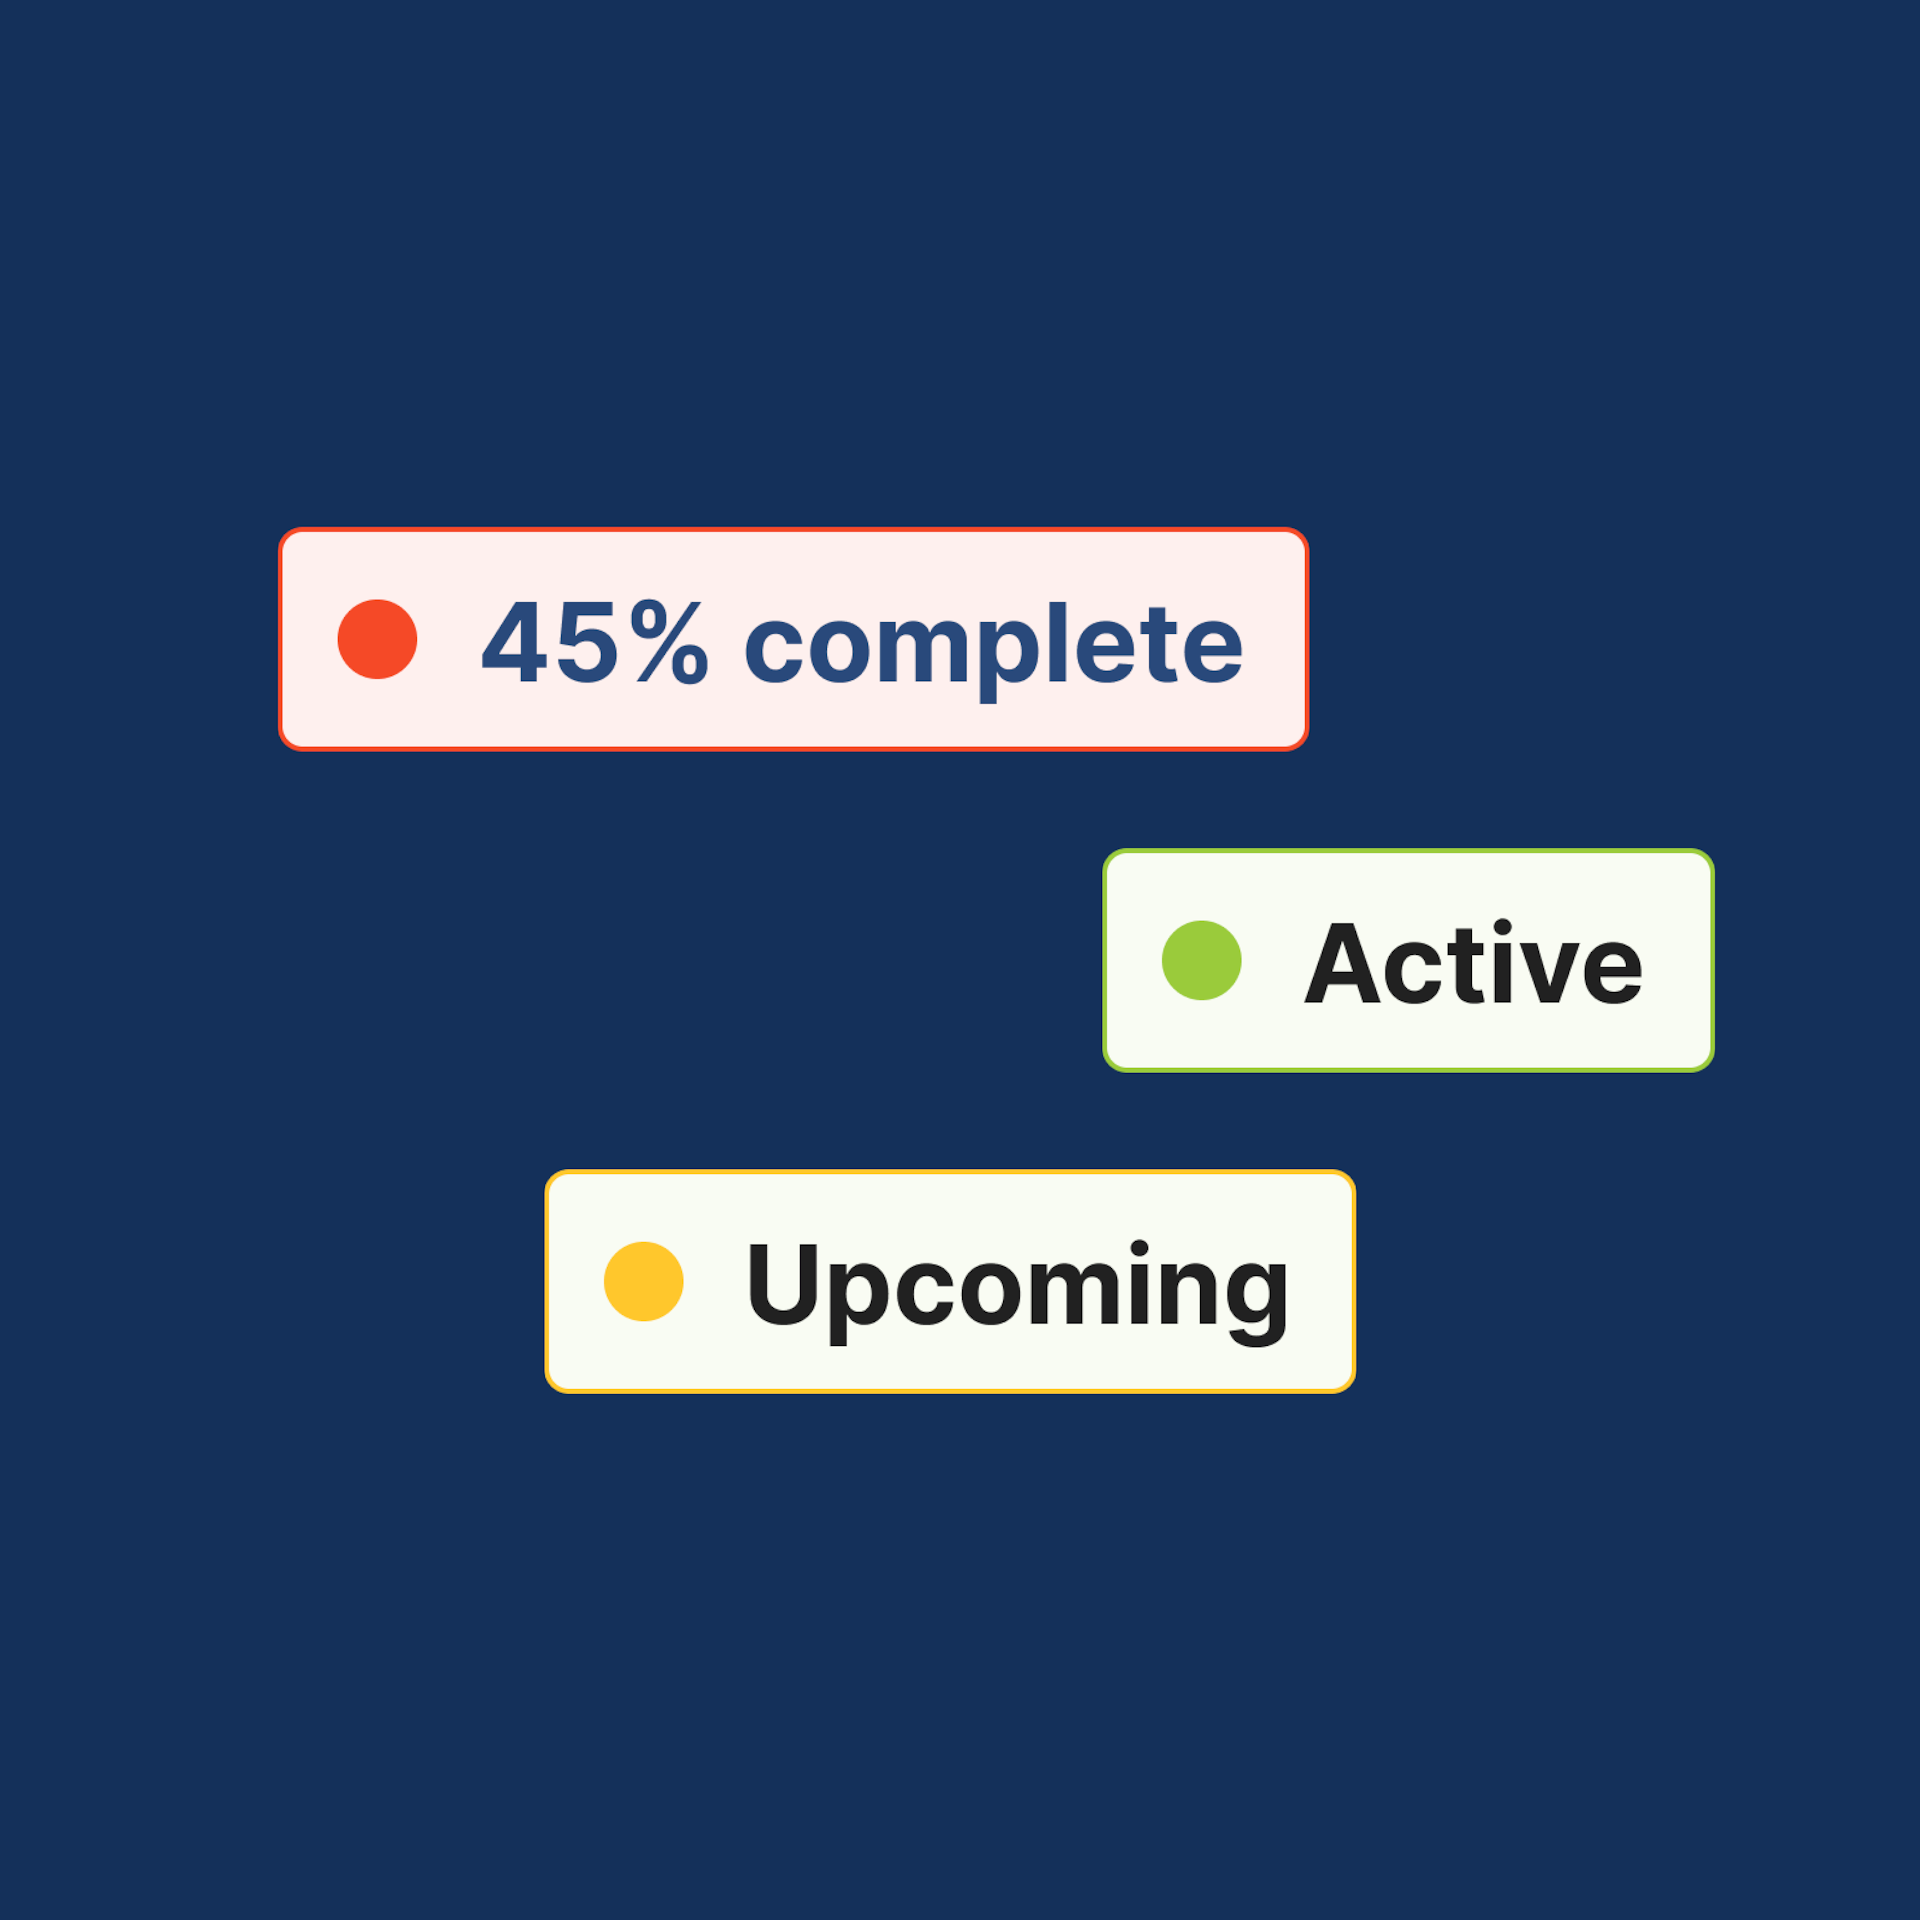 Three status icons showing "45% complete" in red, "Active" in green, and "Upcoming" in yellow. 